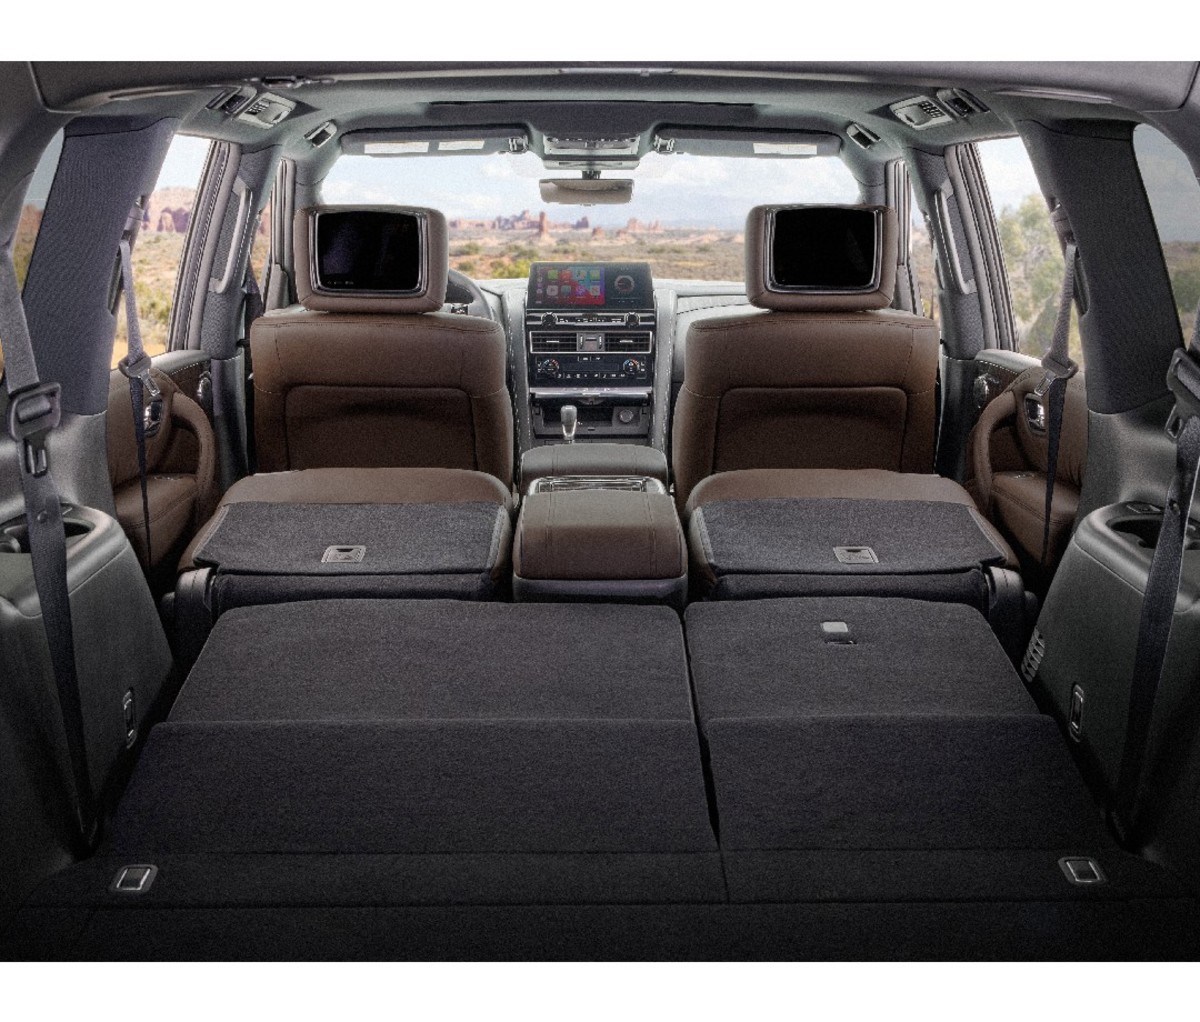 Interior of SUV with seats down